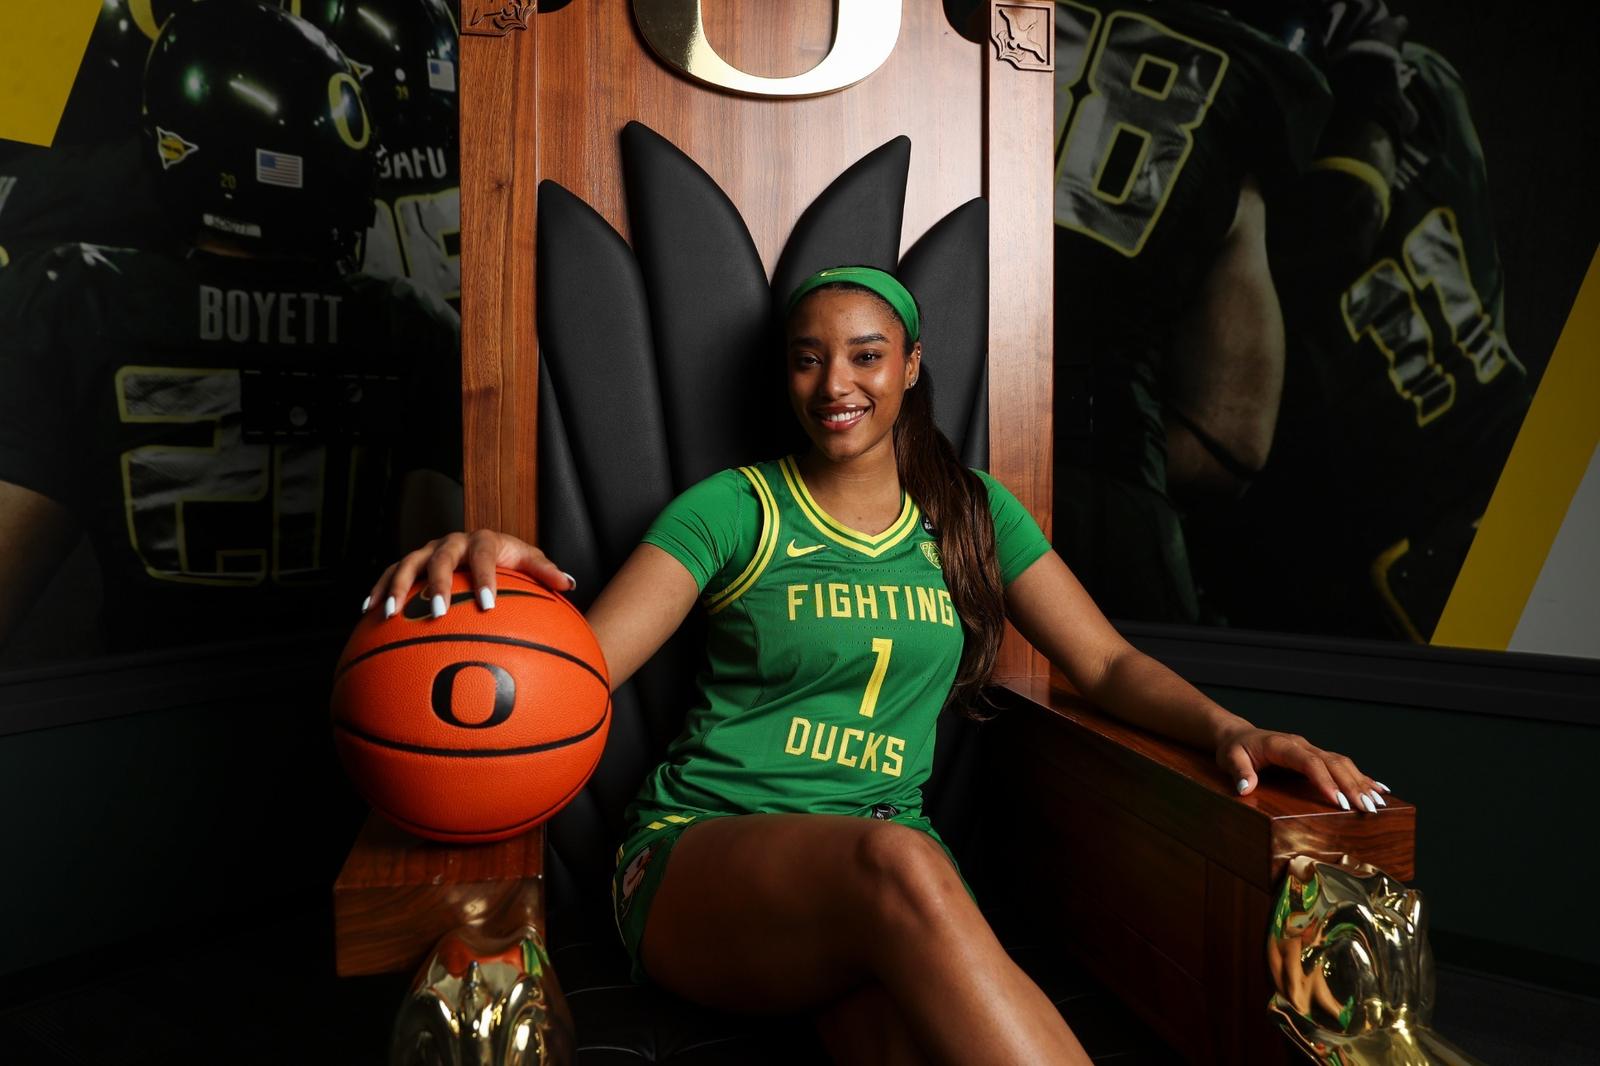 Ducks Sign All-Big West Transfer Whitfield